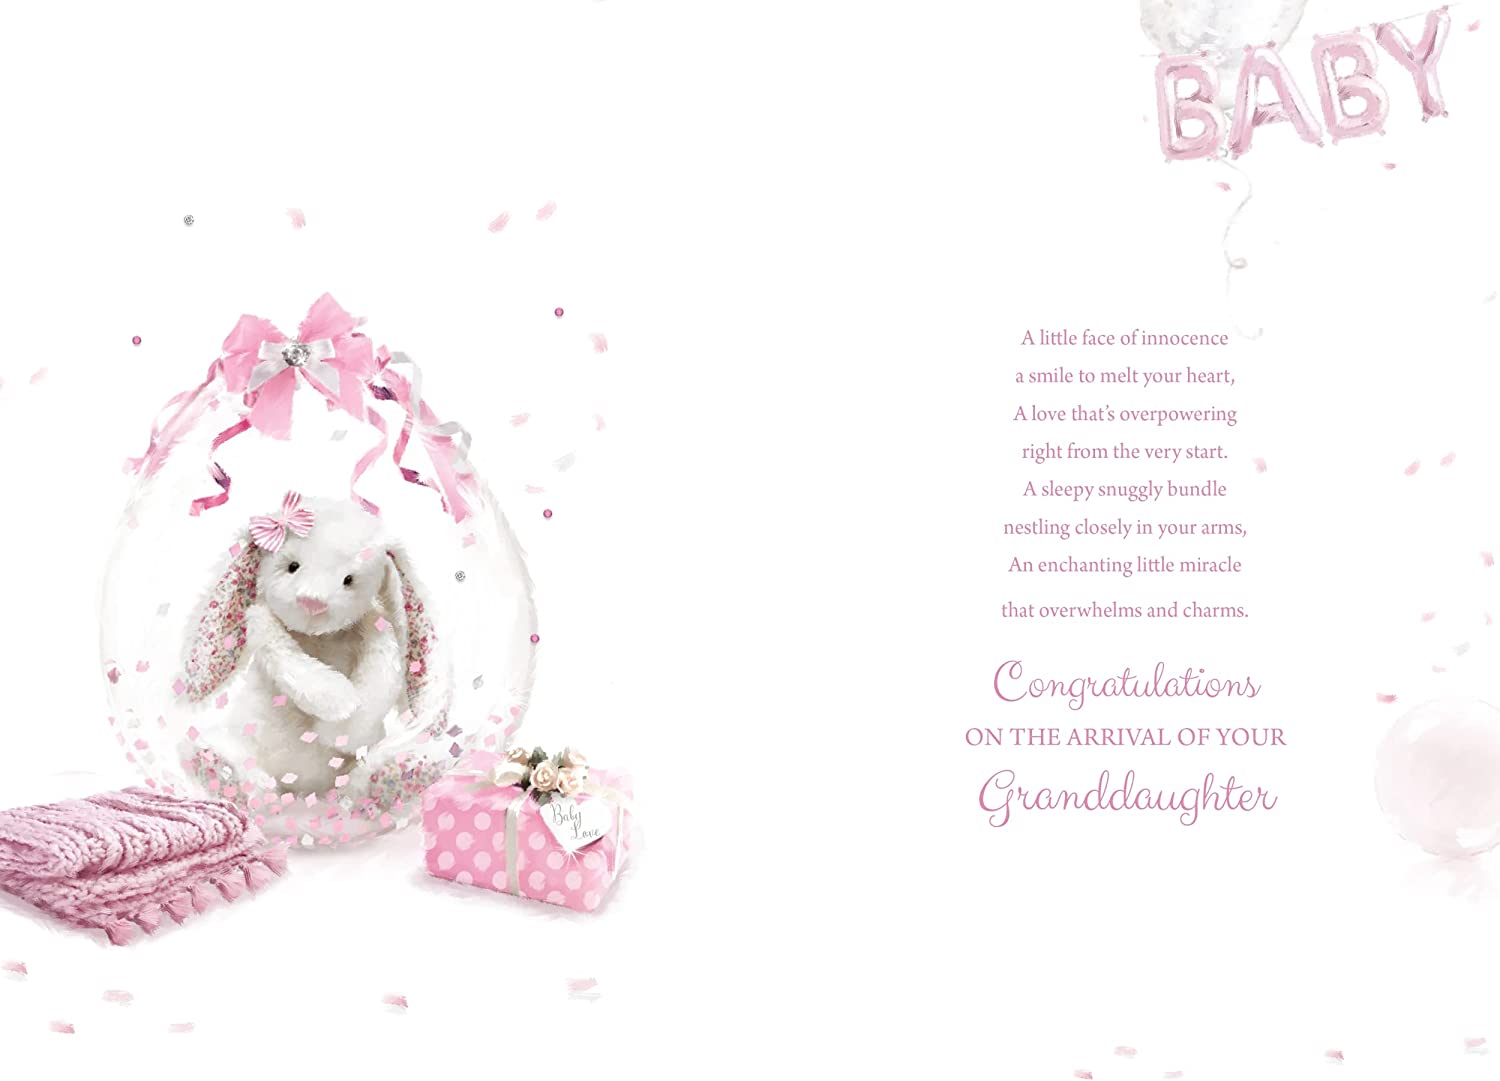 Birth Of Your Baby Granddaughter Card - Cute Rabbit In A Balloon And Gifts